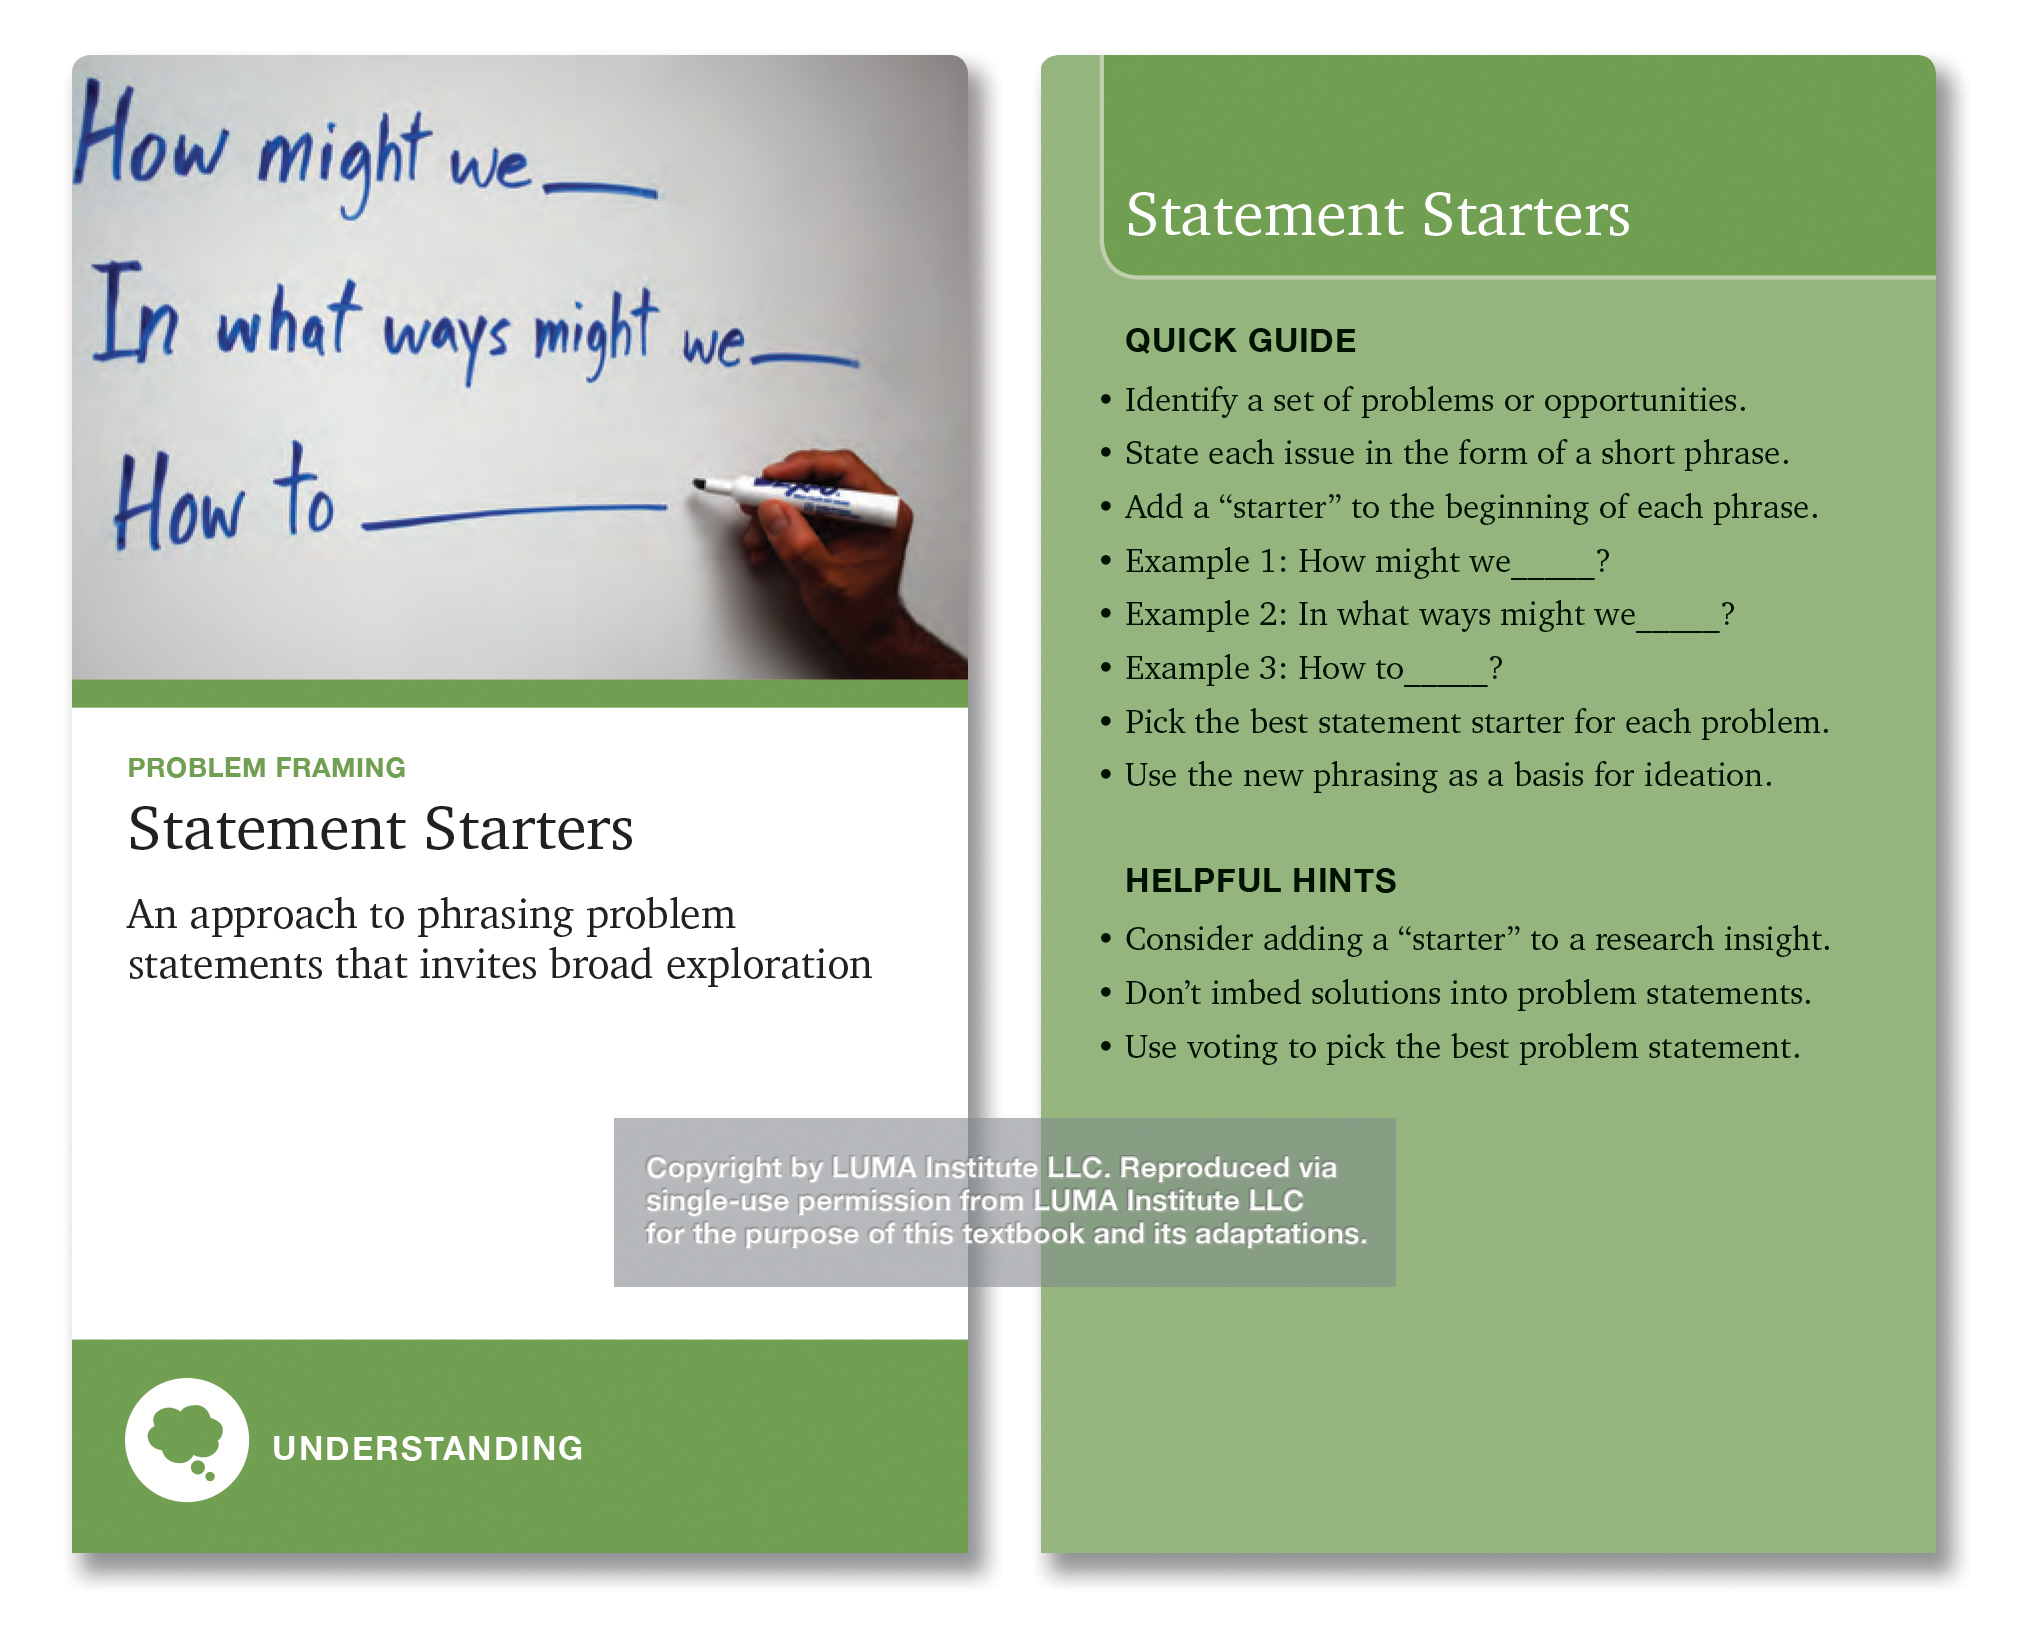 Depicted, Statement Starters, “an approach to phrasing problem statements that invites broad exploration.” The quick guide has bullets including “Identify a set of problems or opportunities. State each issue. Add a “starter to the beginning of each.” Example: “How might we…” Pick the best starter for the problem. Use the new phrasing as the starting point for ideation.